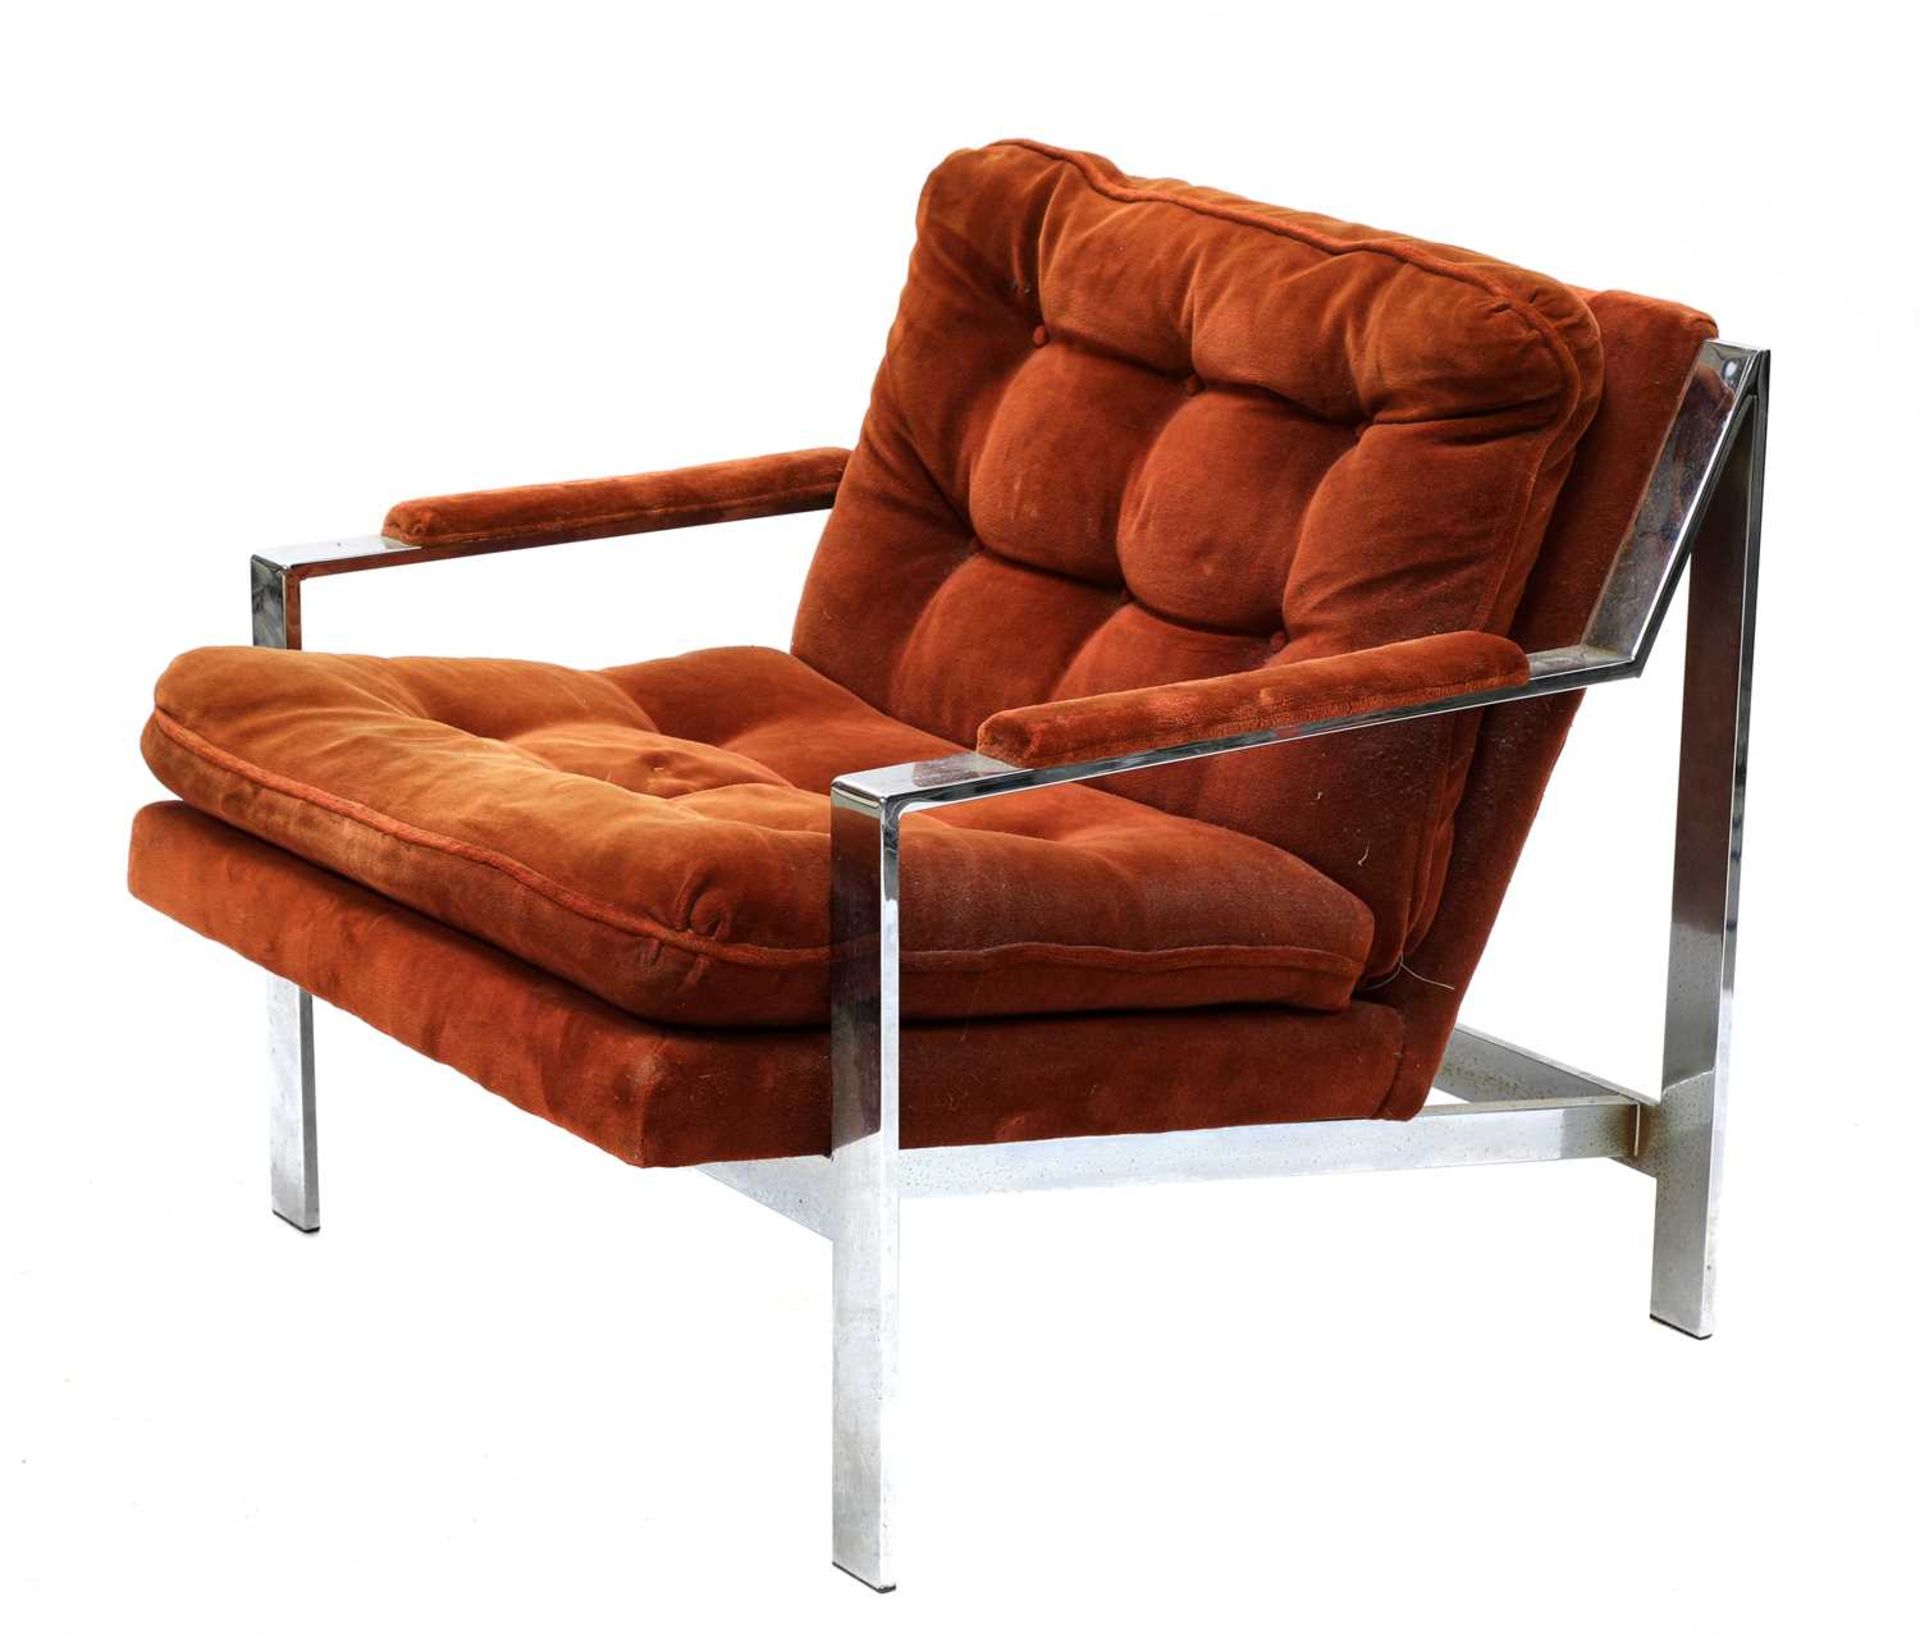 A chrome and ginger upholstered armchair,